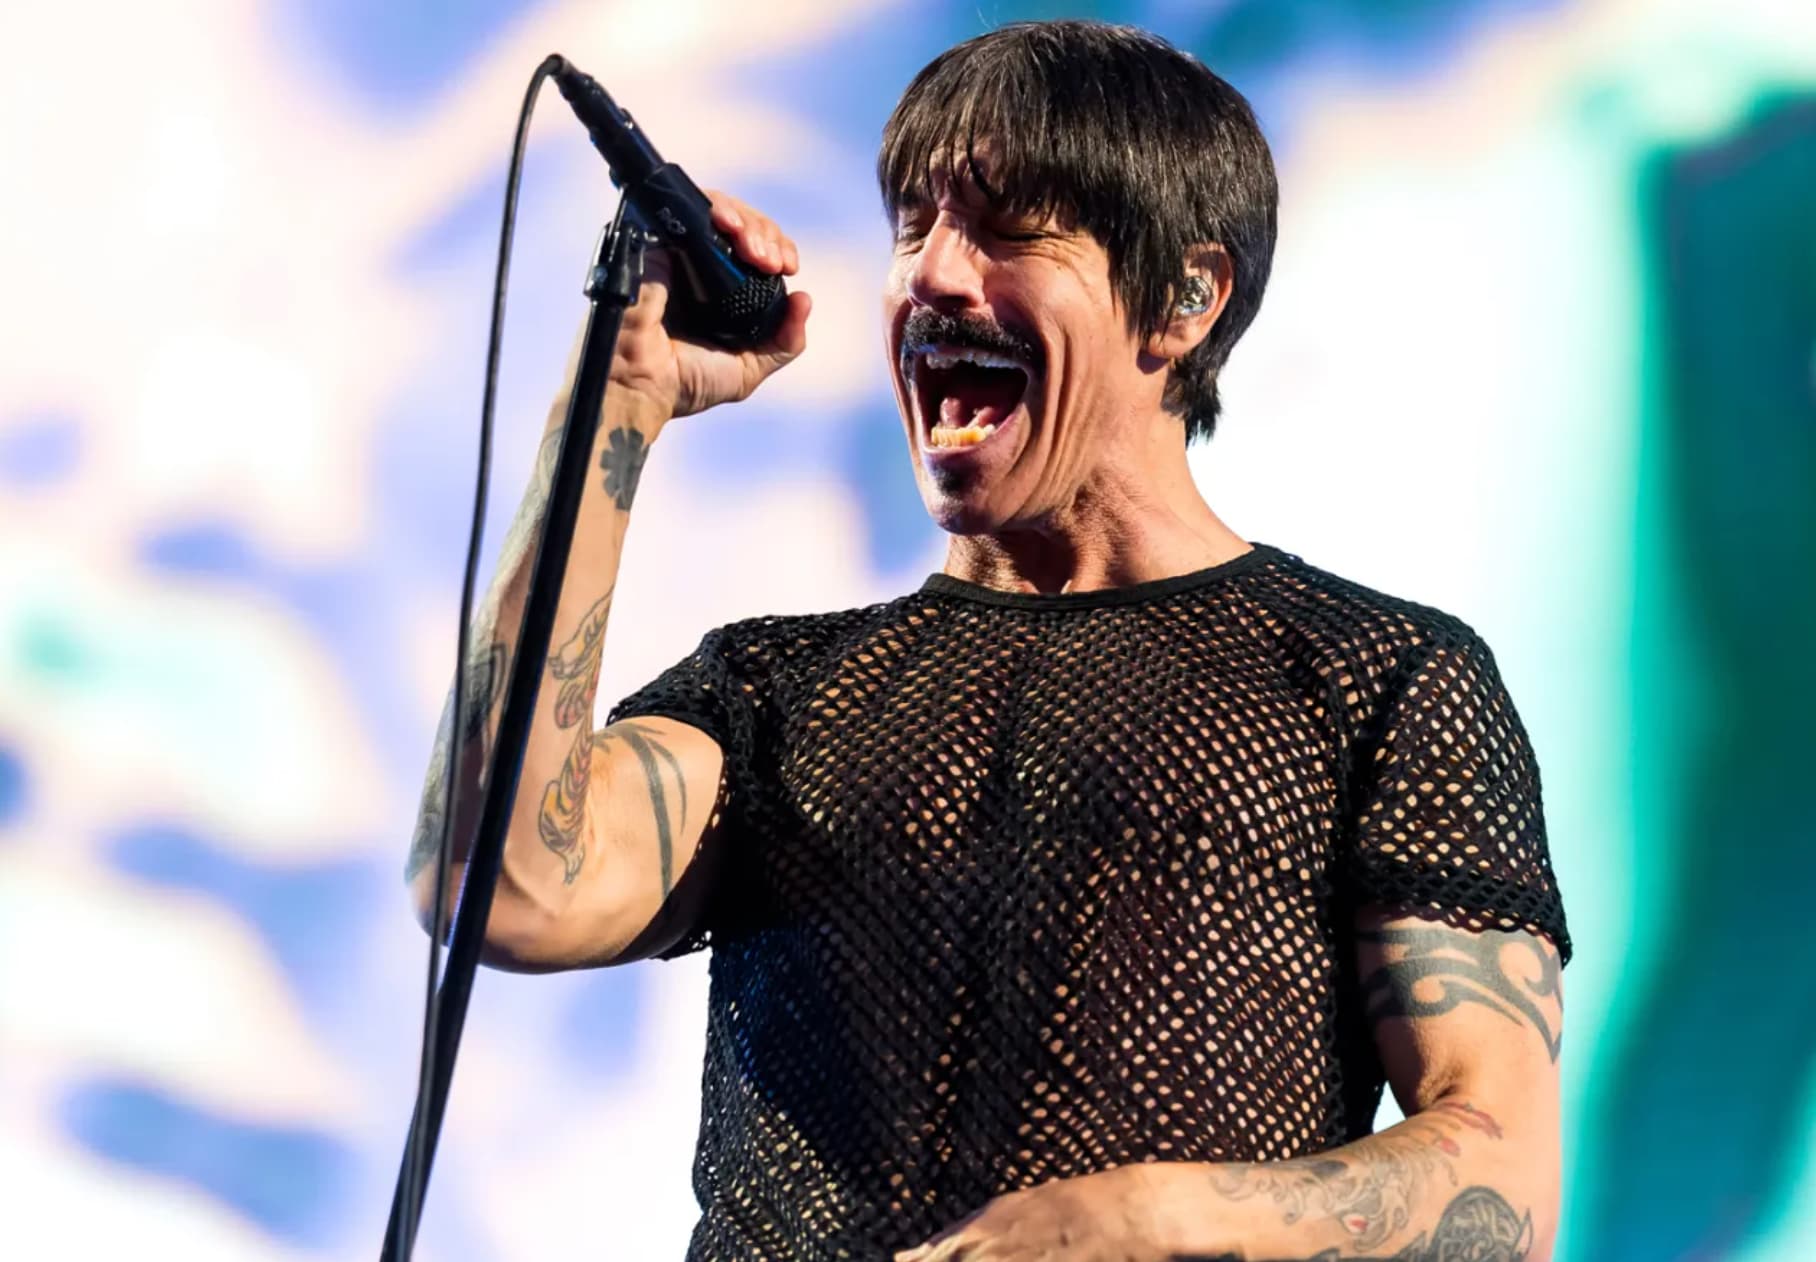 red hot chili peppers anthony kiedis